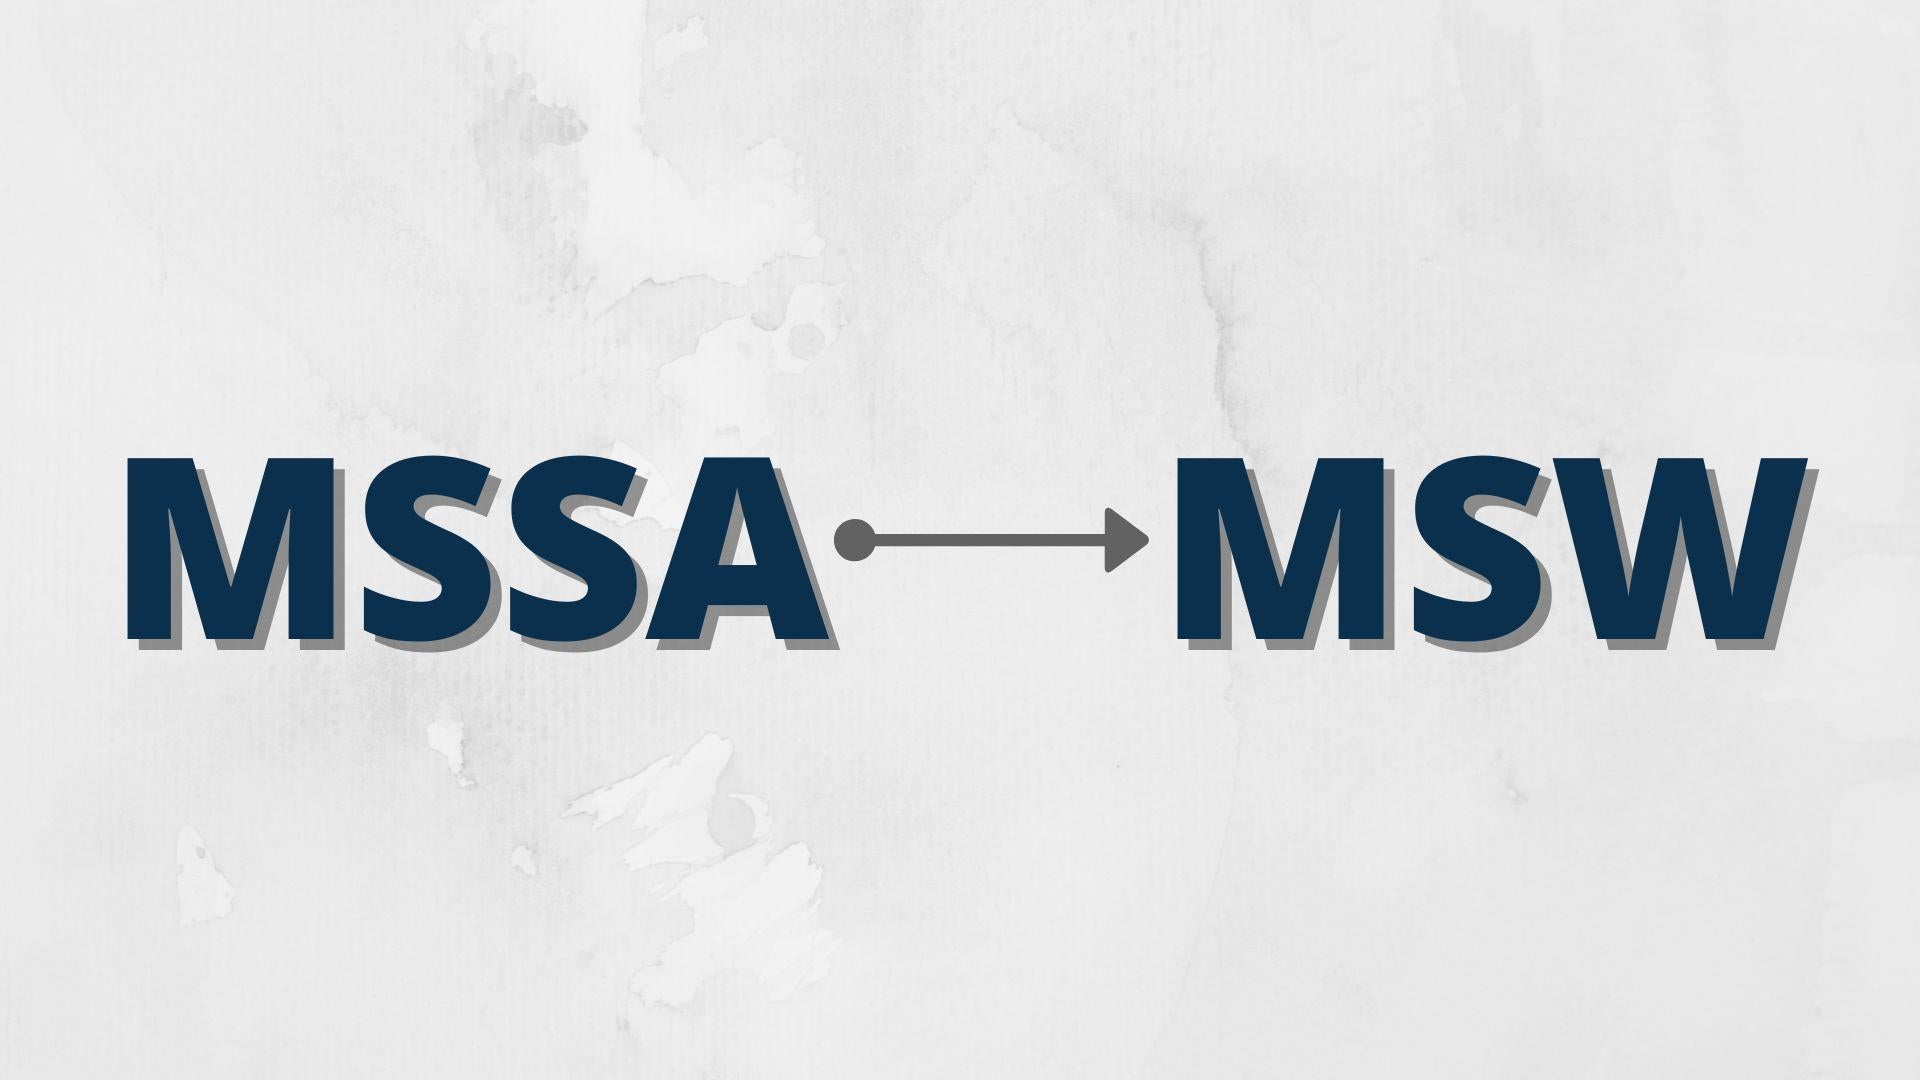 "MSSA arrow point to right MSW"